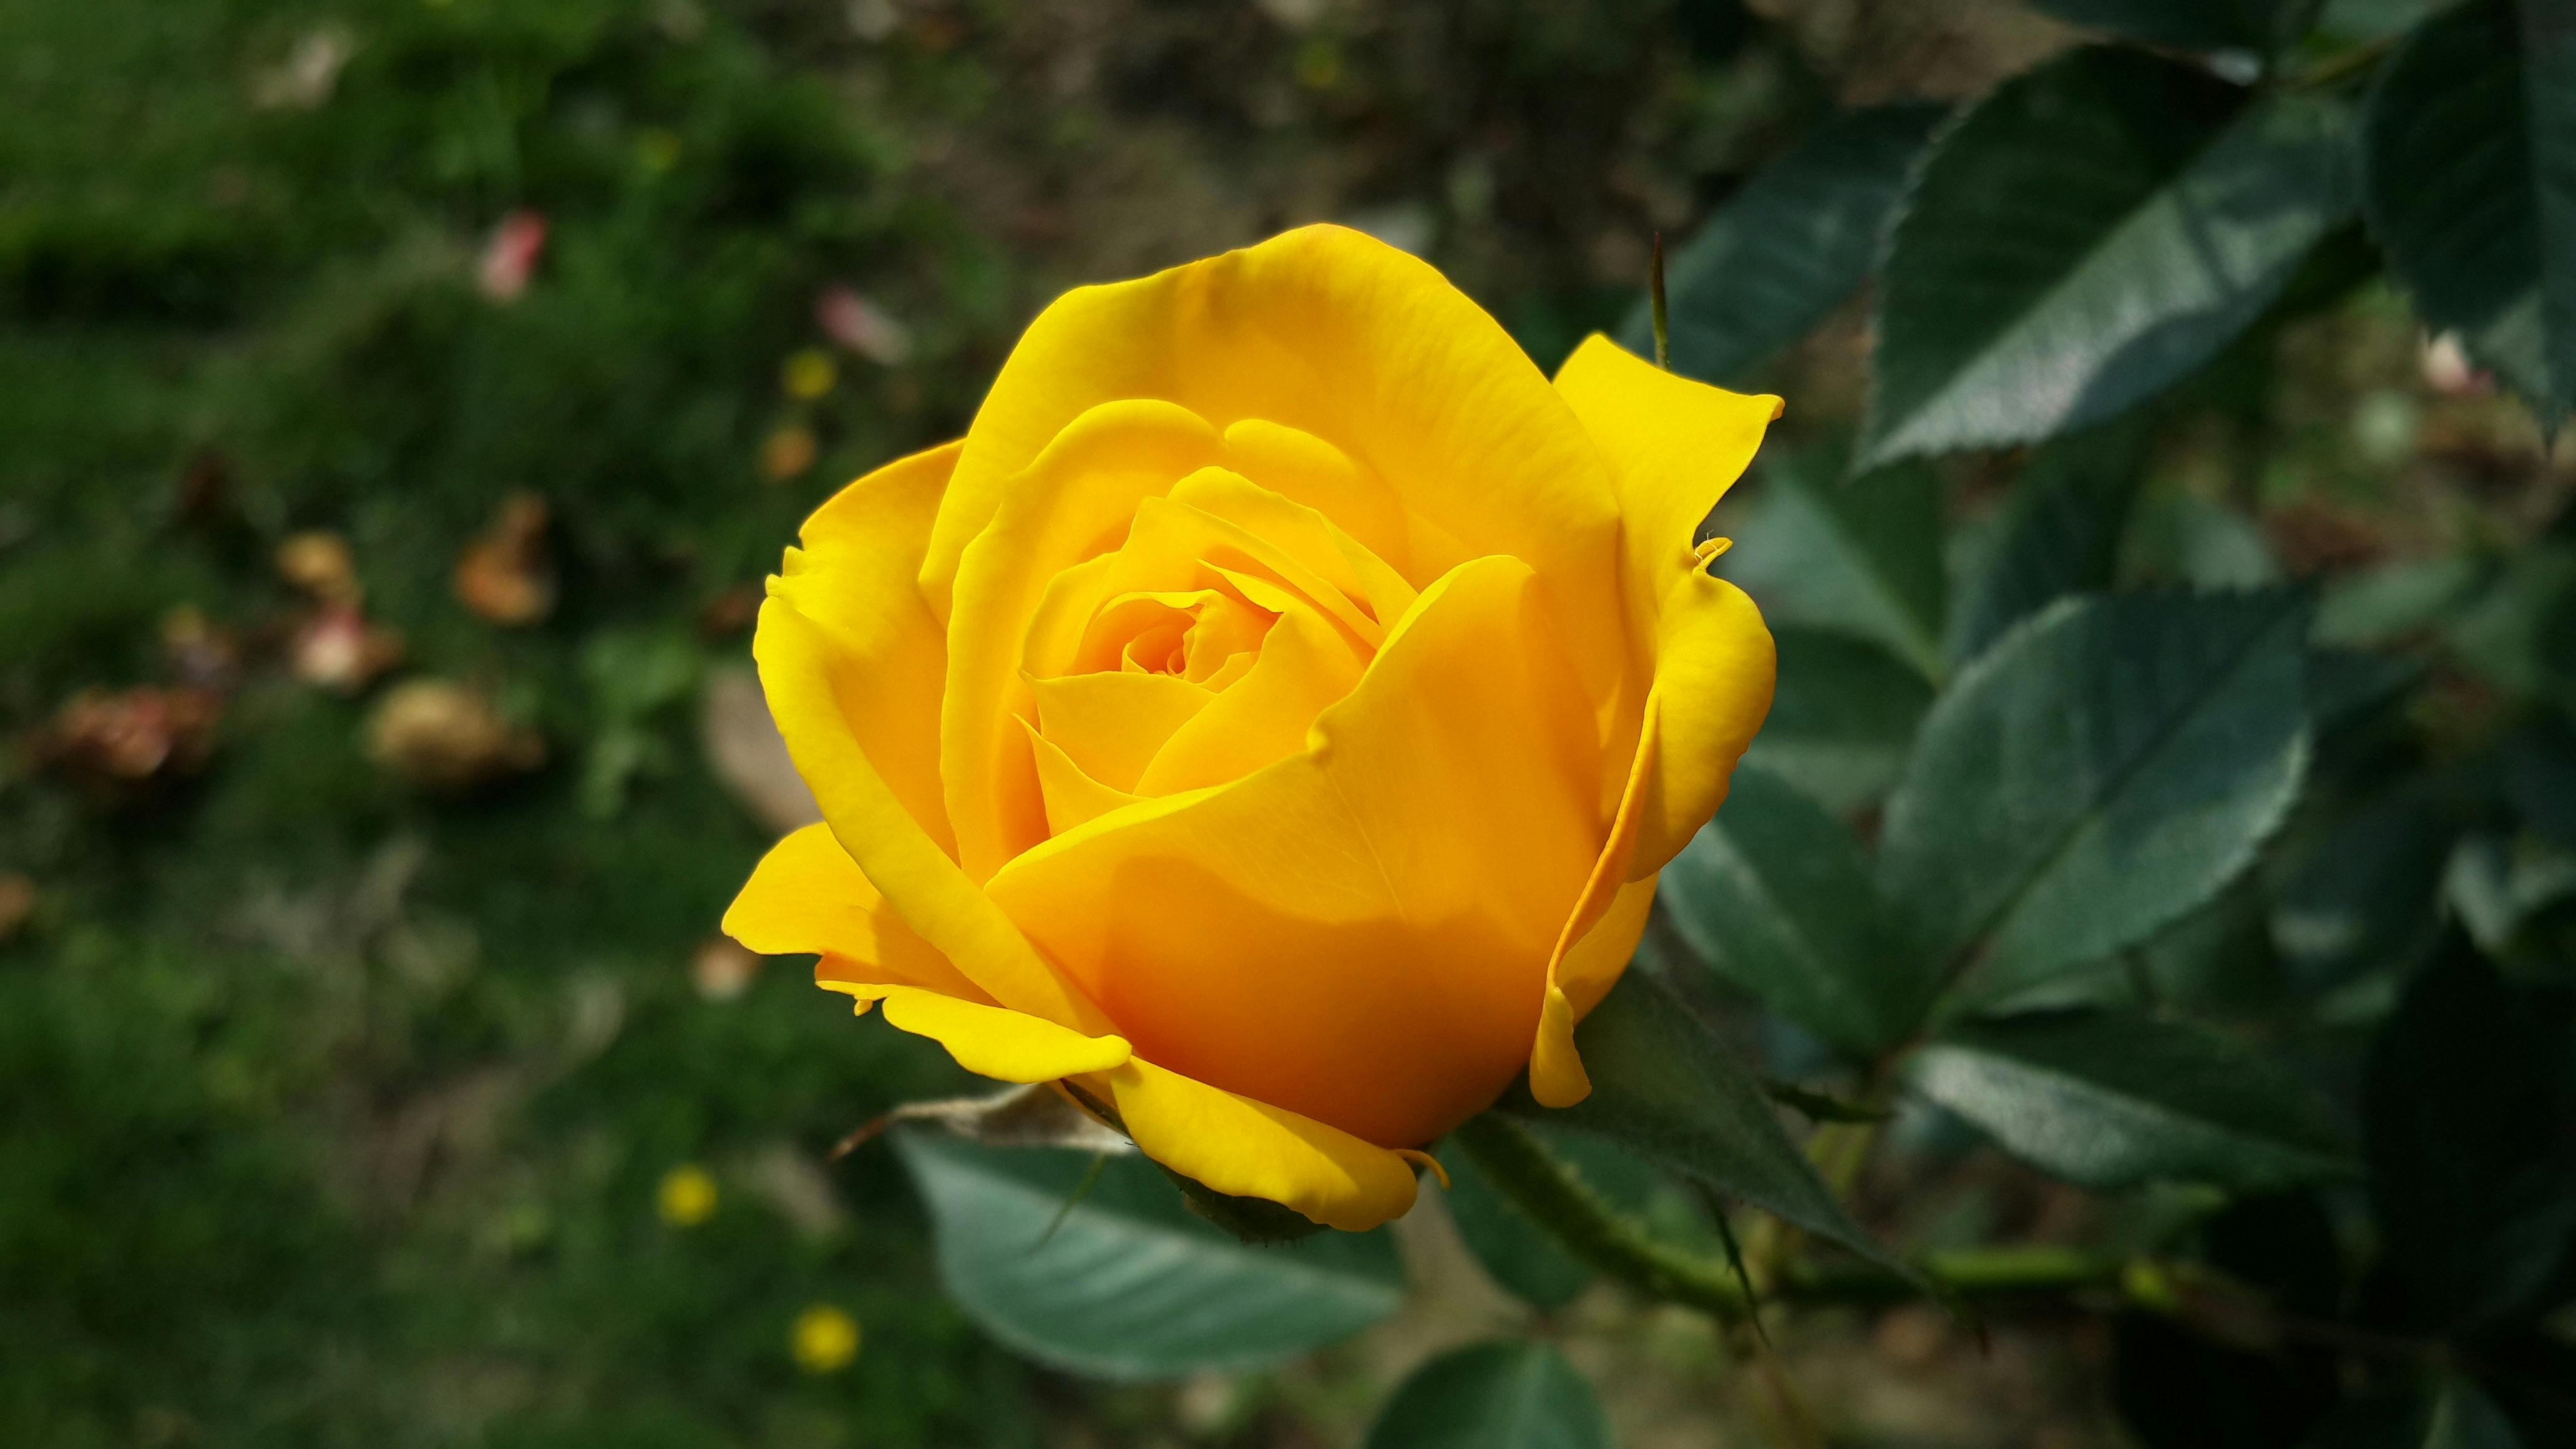 yellow roses pictures